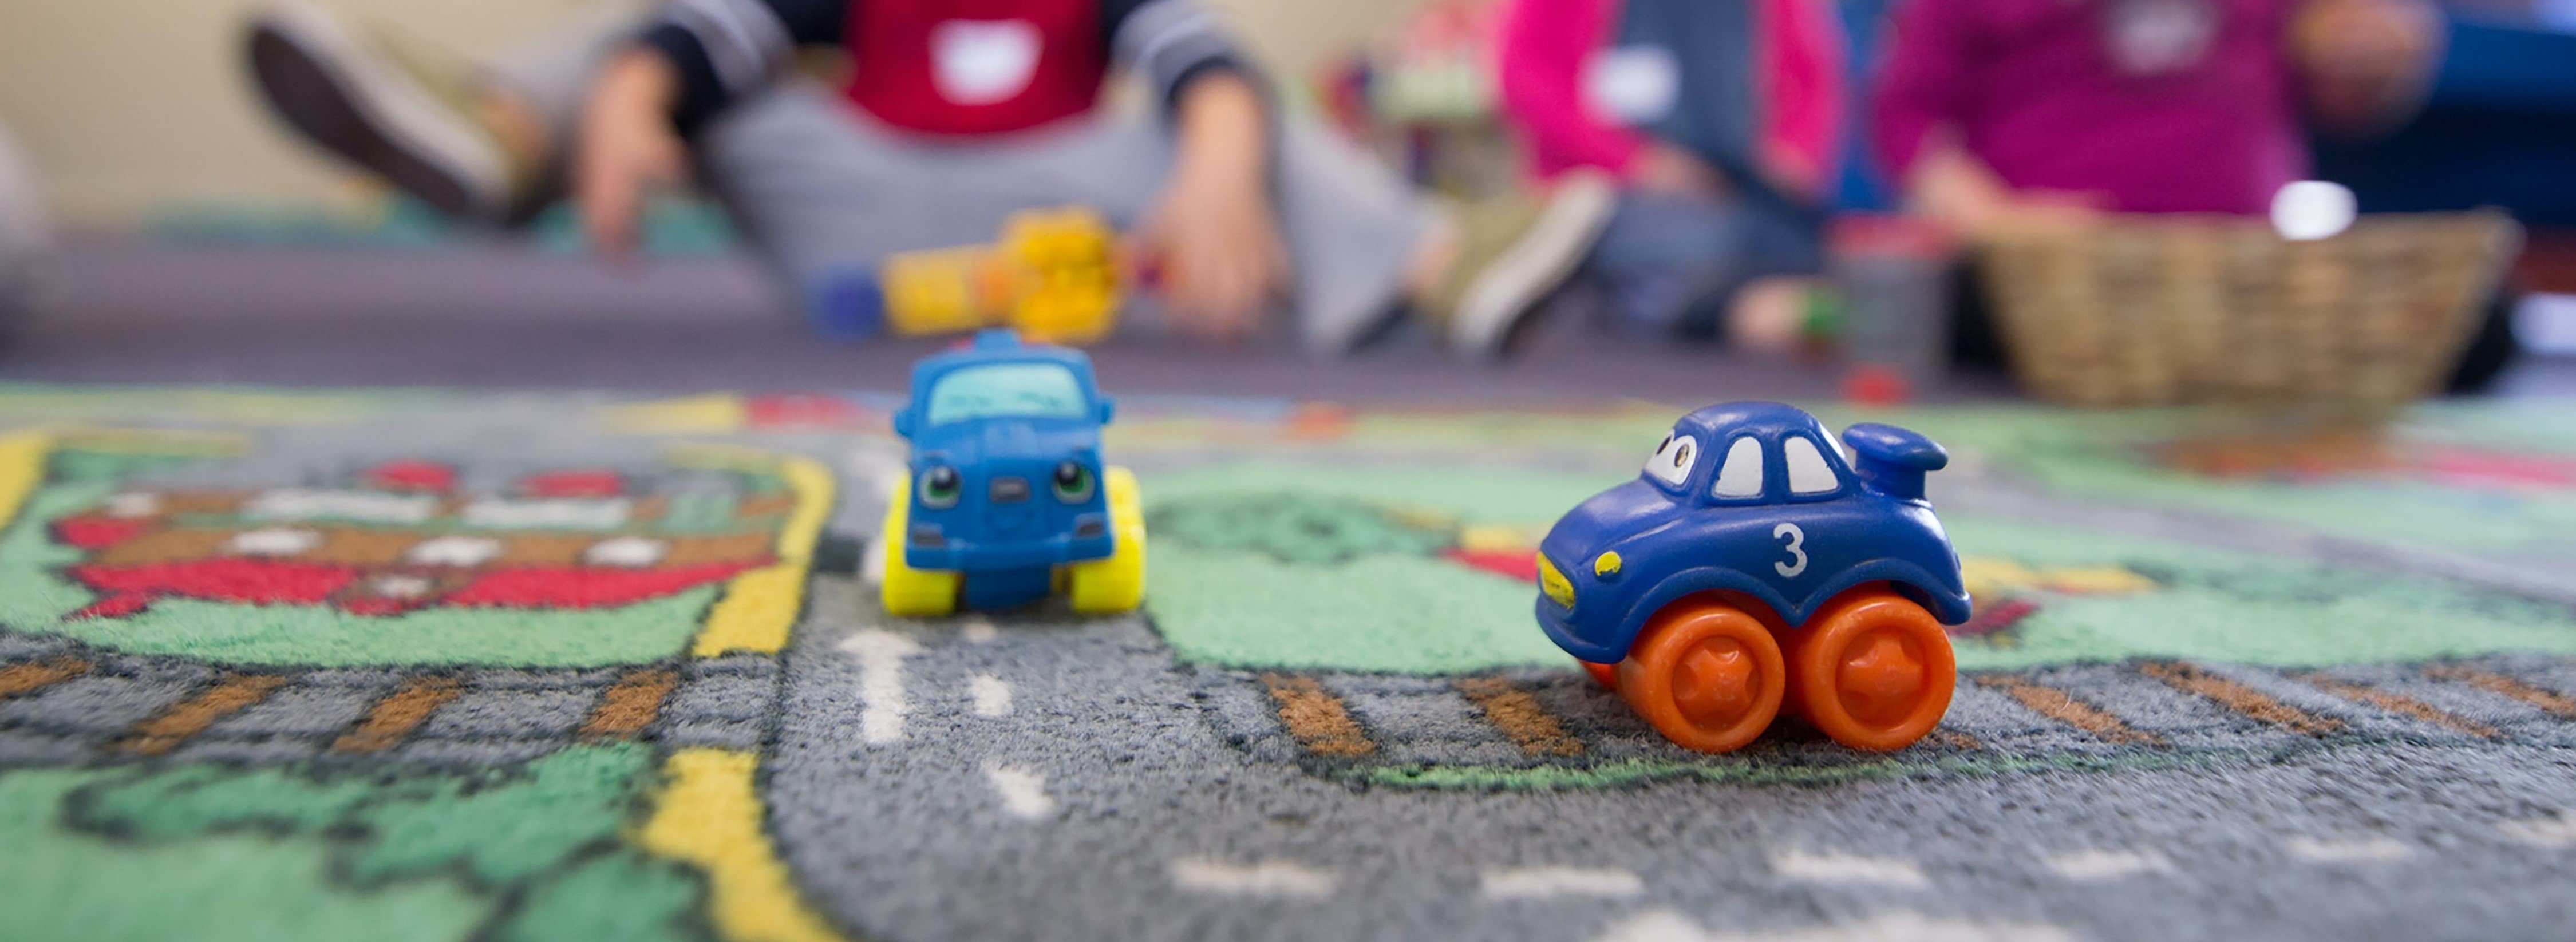 Image of children at a day care with toy cars in teh foreground